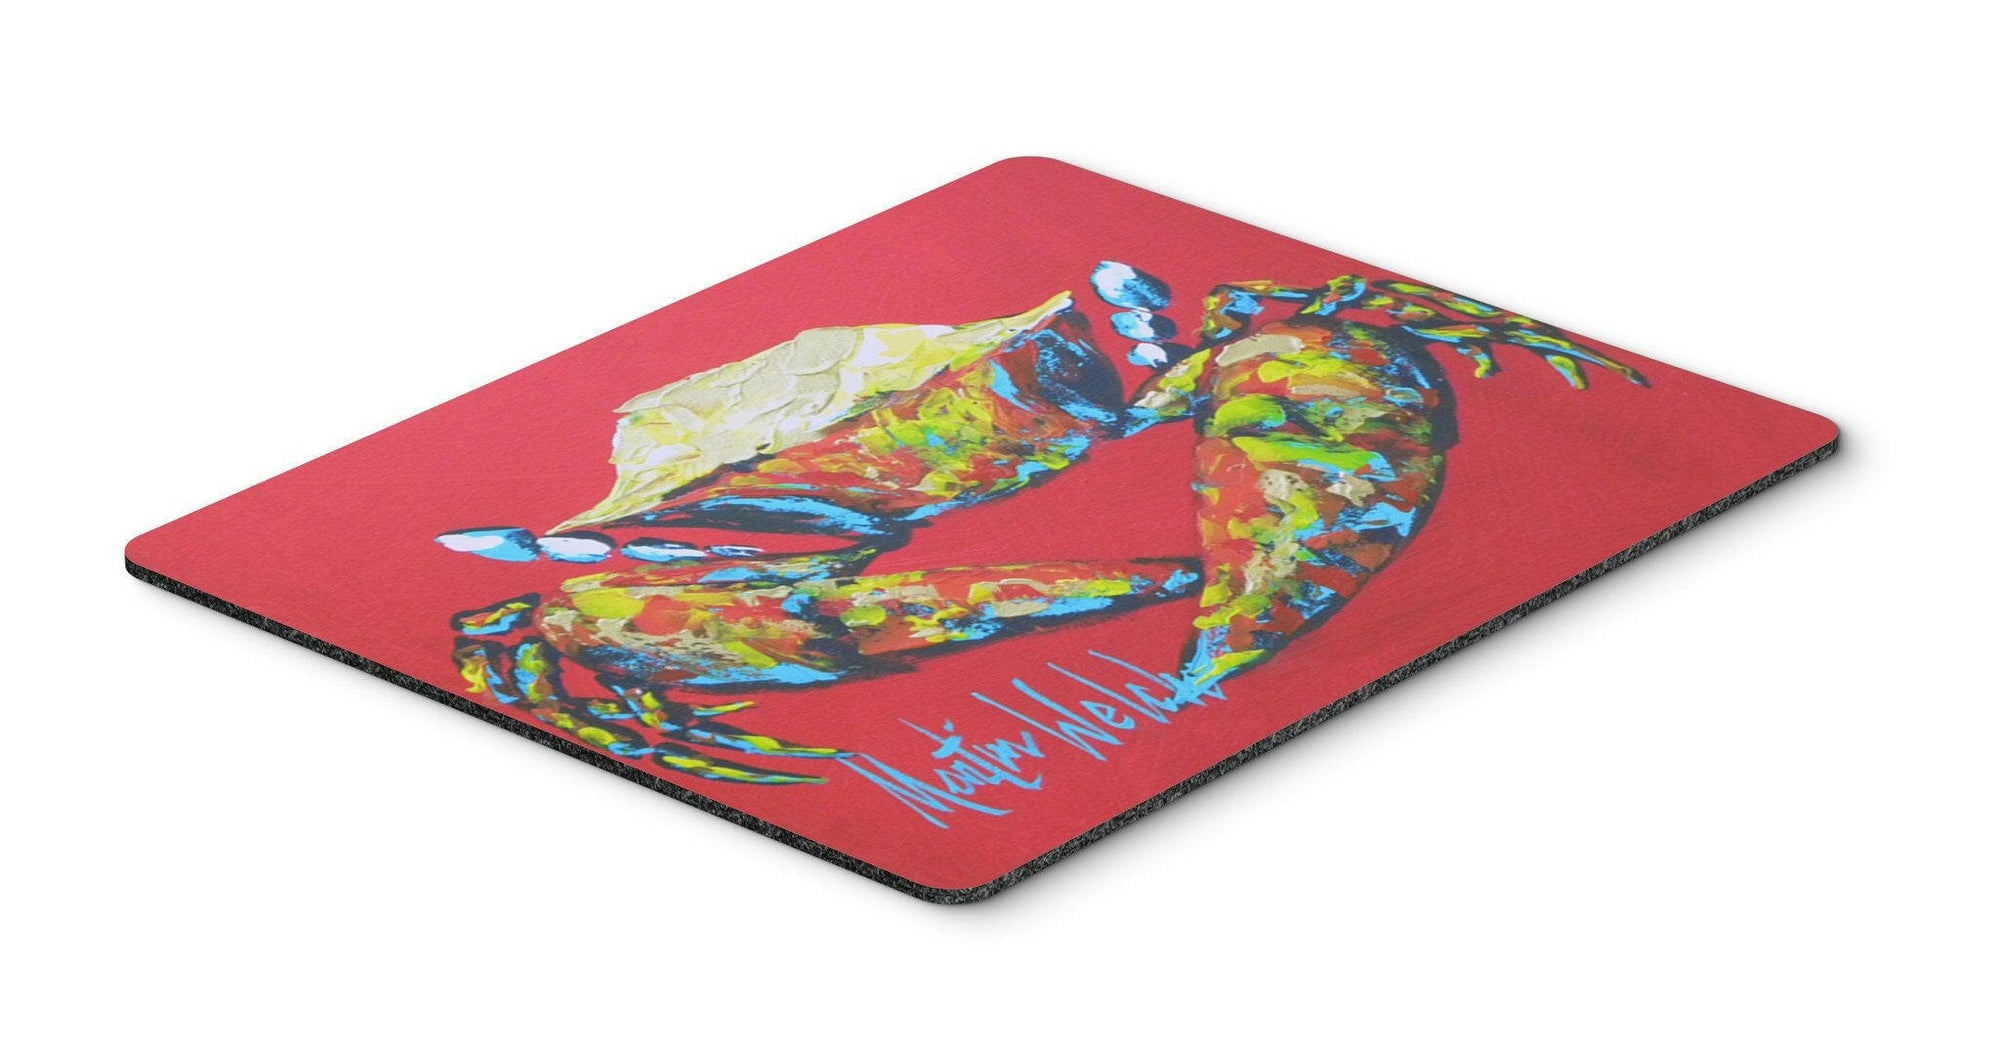 Crab Seafood One Mouse Pad, Hot Pad or Trivet by Caroline's Treasures